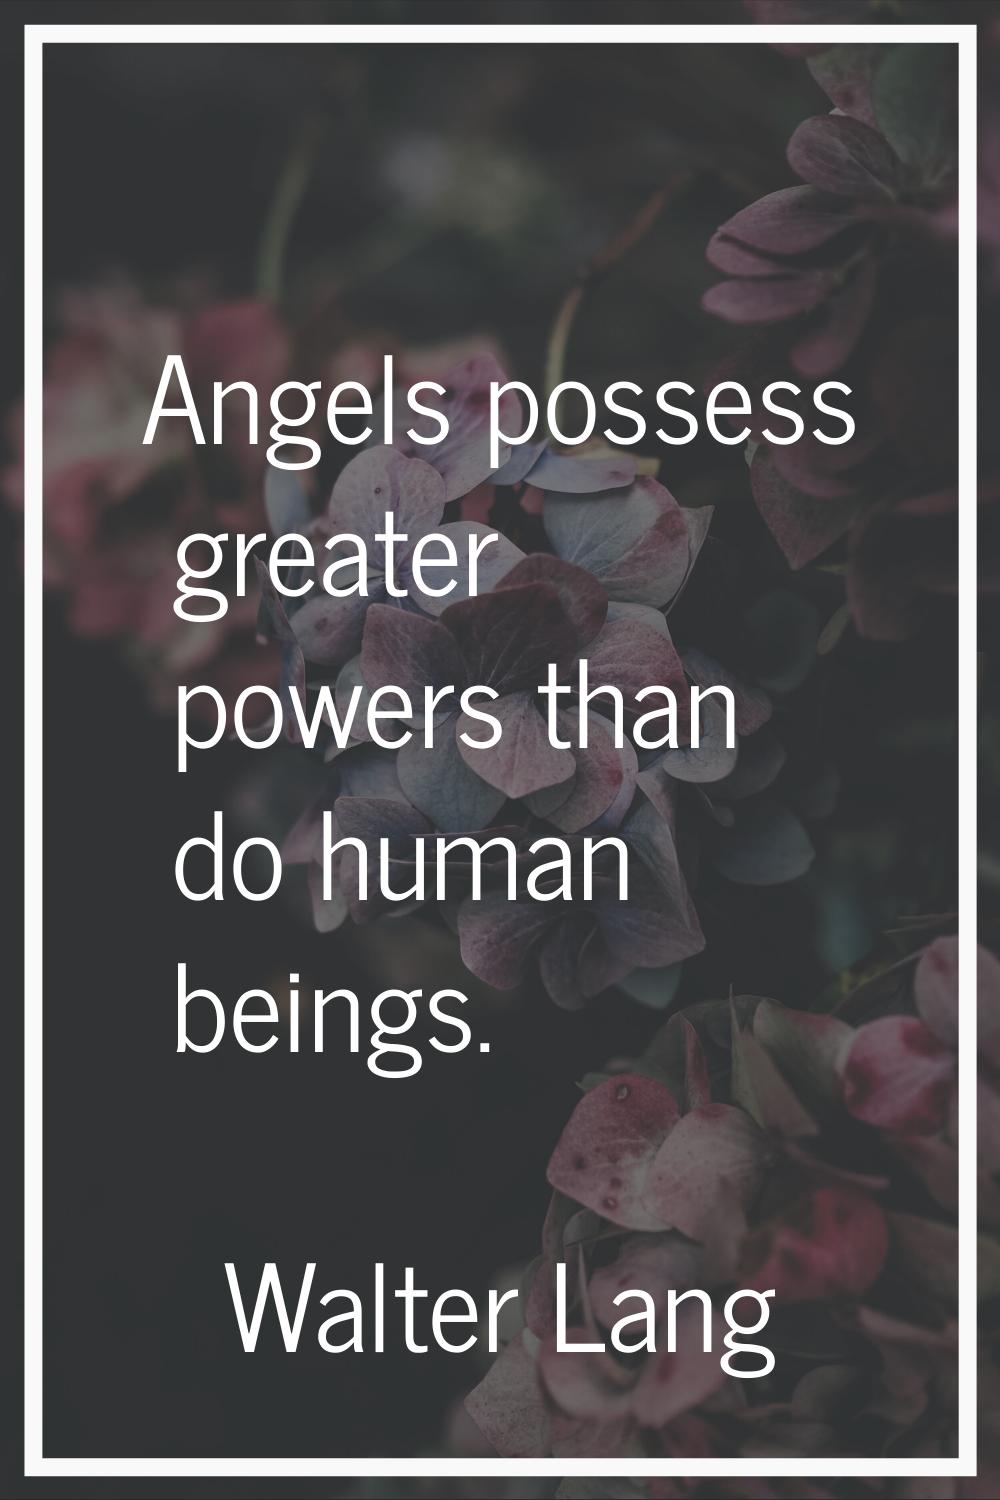 Angels possess greater powers than do human beings.